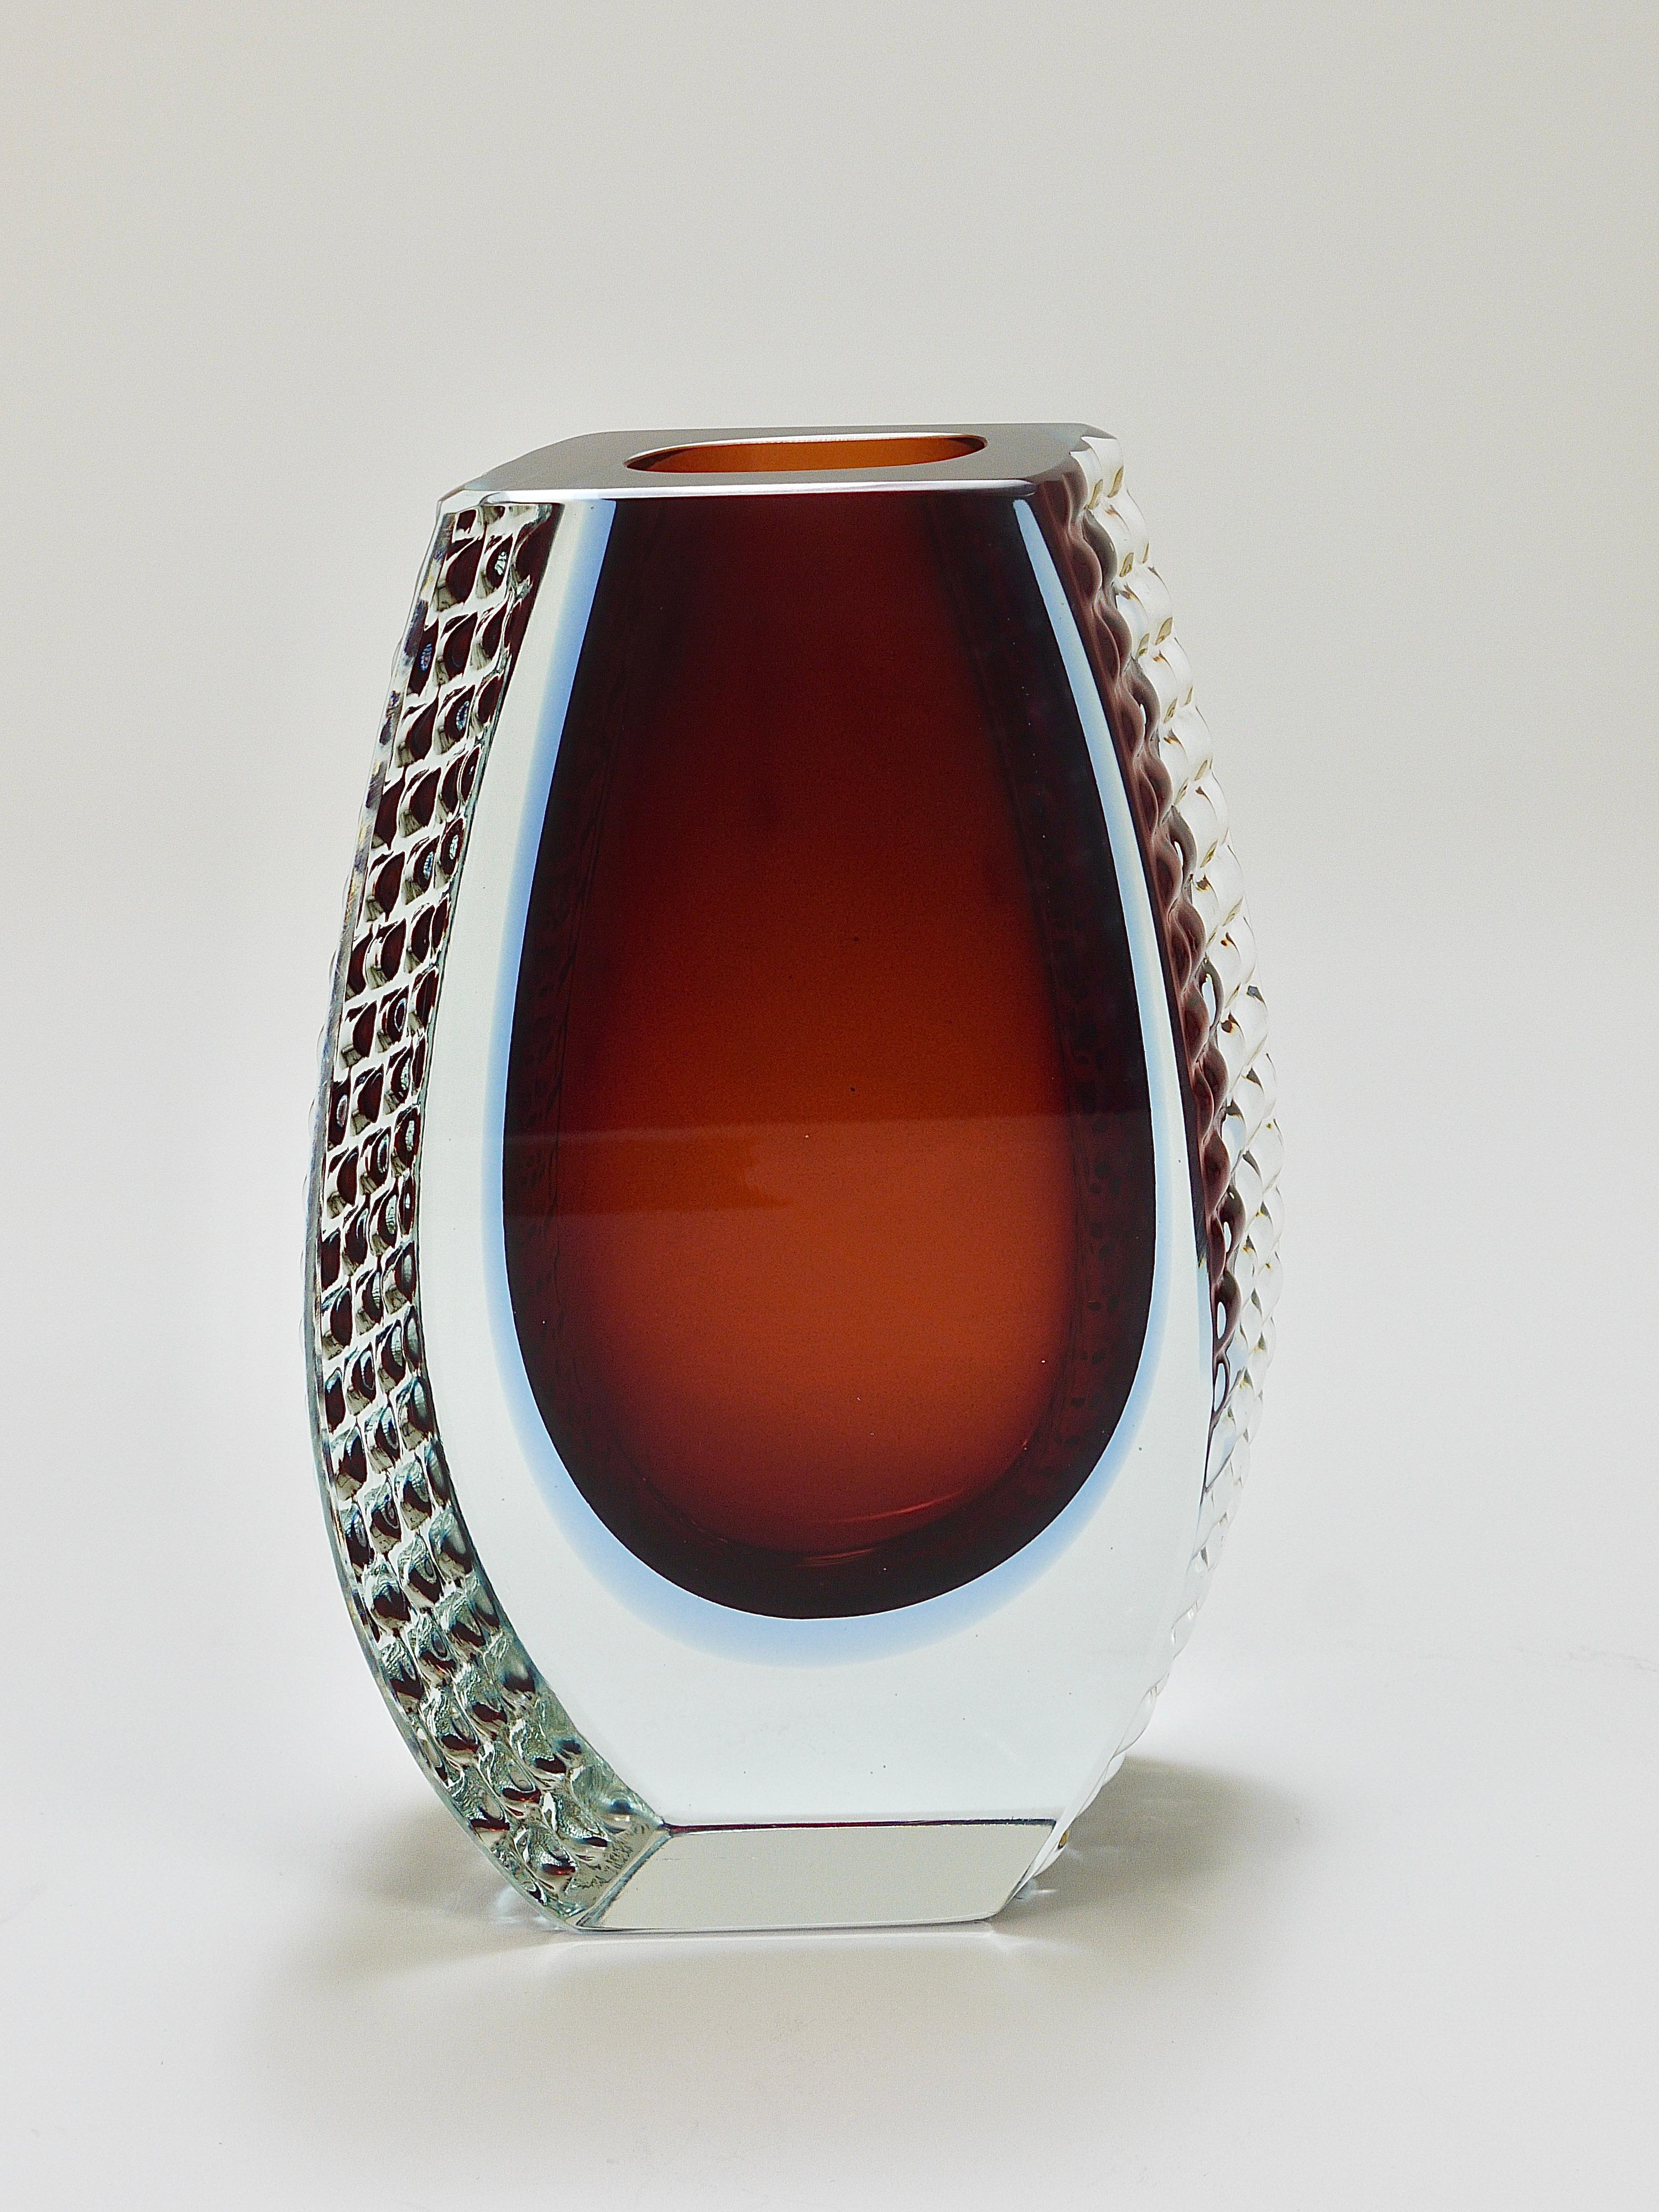 Large Mandruzzato Sommerso Murano Textured Facetted Art Glass Vase, Italy, 1970s For Sale 4